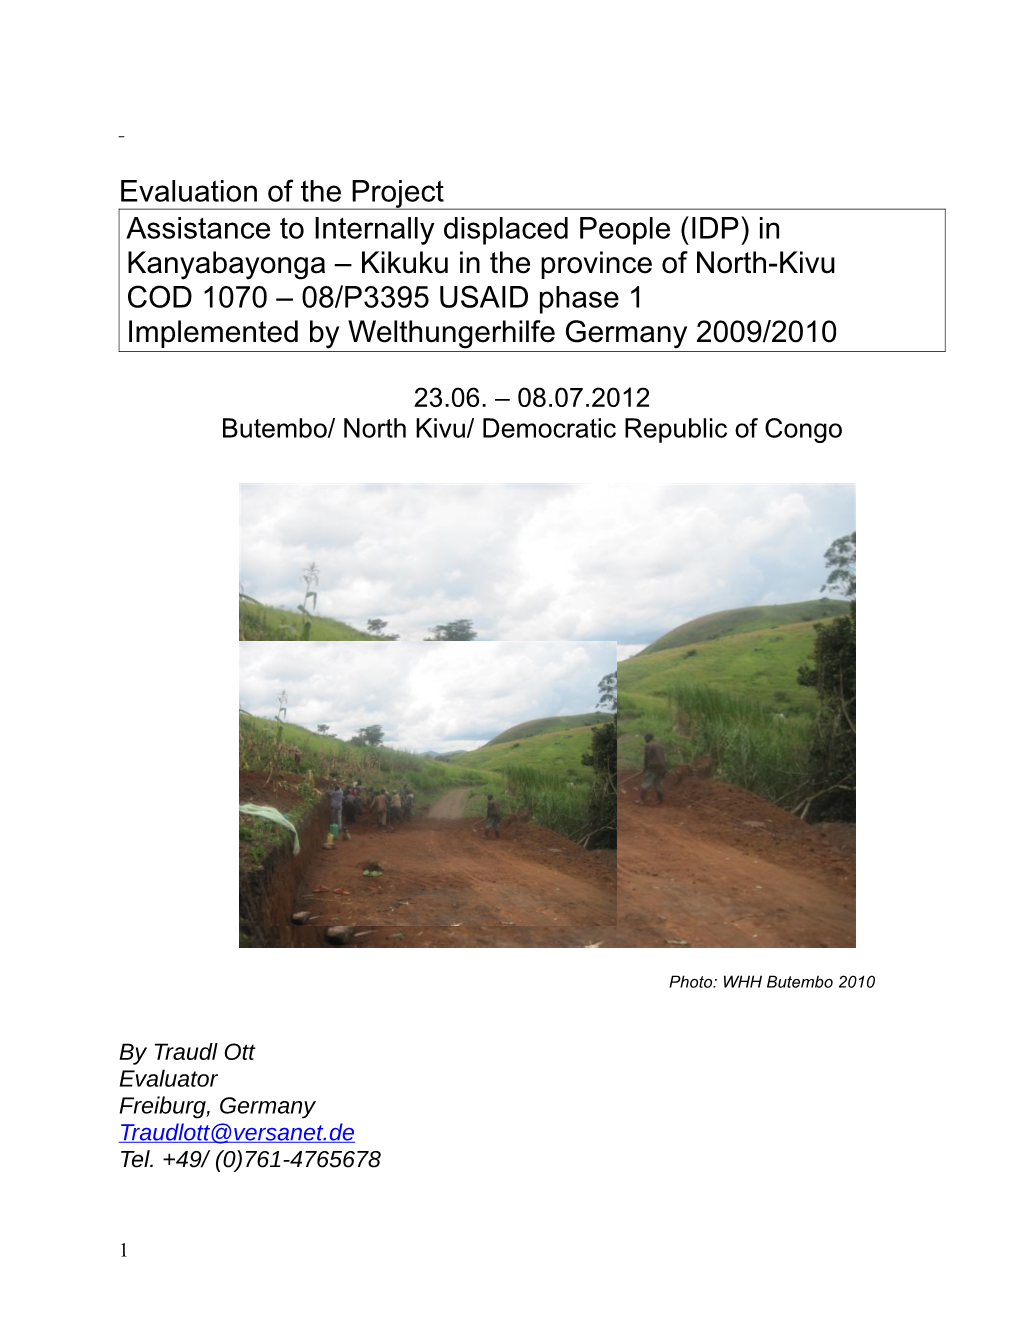 Evaluation of the Project Assistance to Internally Displaced People (IDP) in Kanyabayonga – Kikuku in the Province of North-Ki